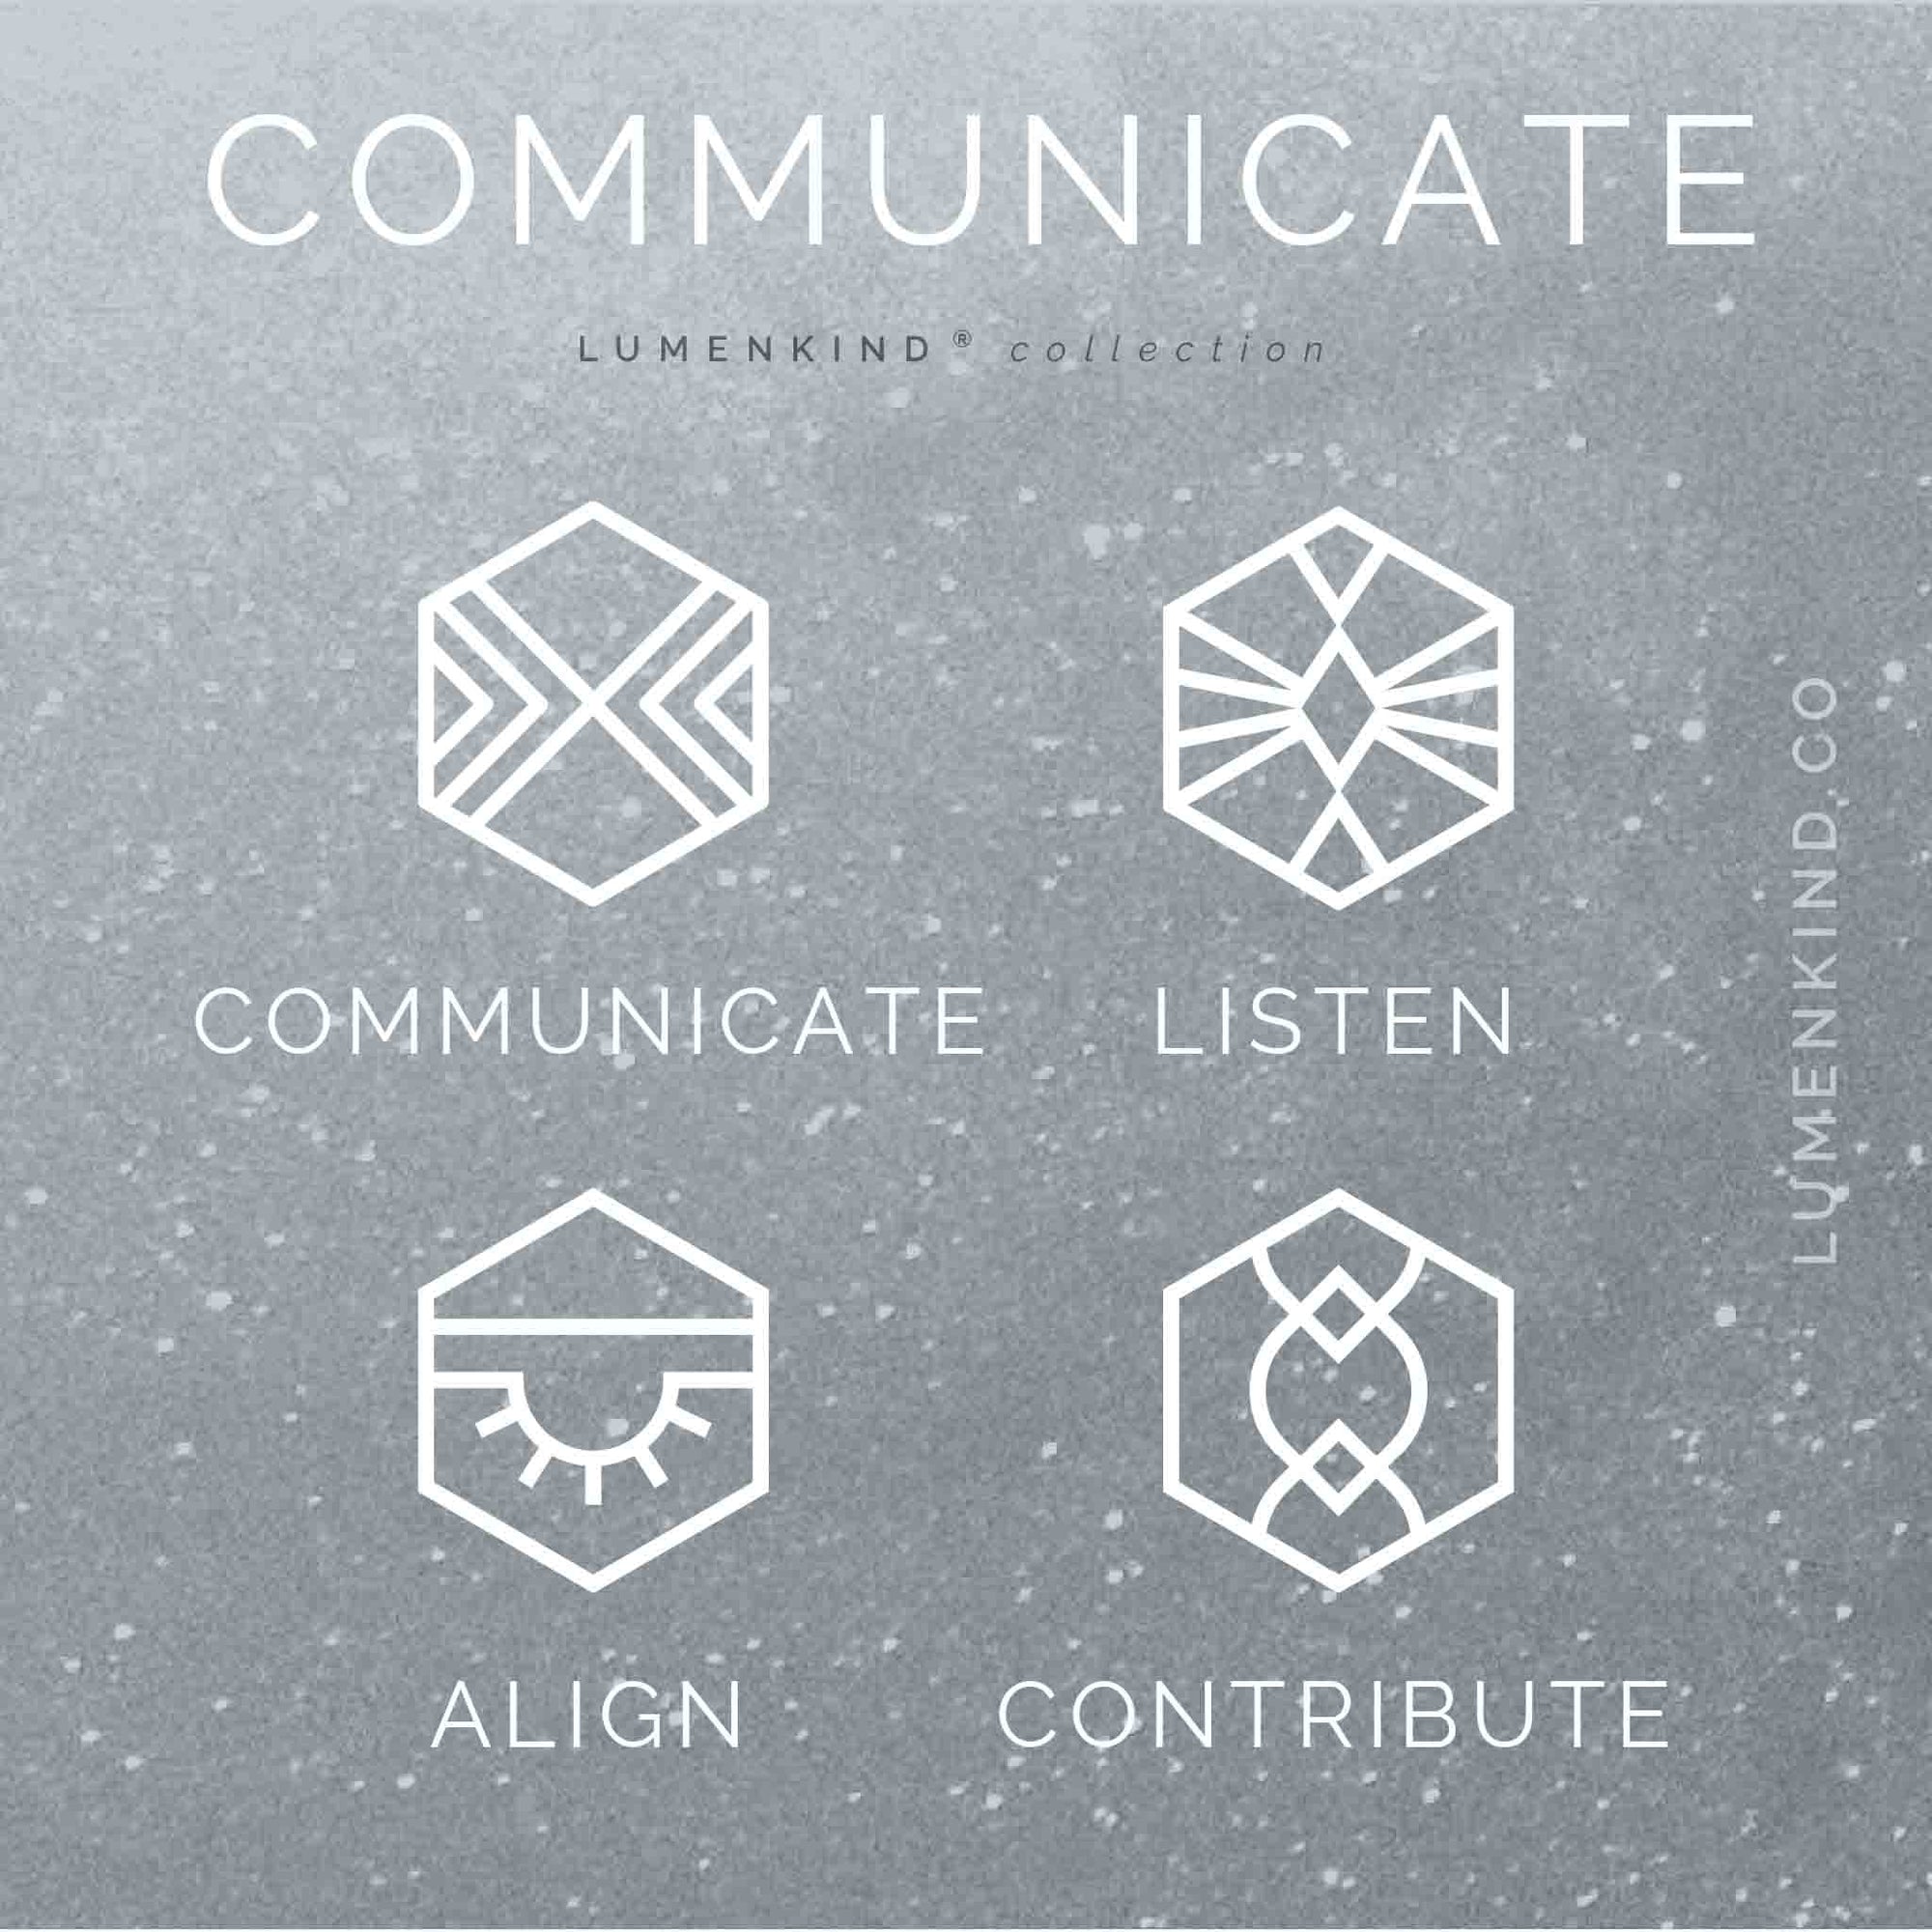 The Communicate Collection of Mindful Marks includes Communicate, Align, Listen, and Contribute.